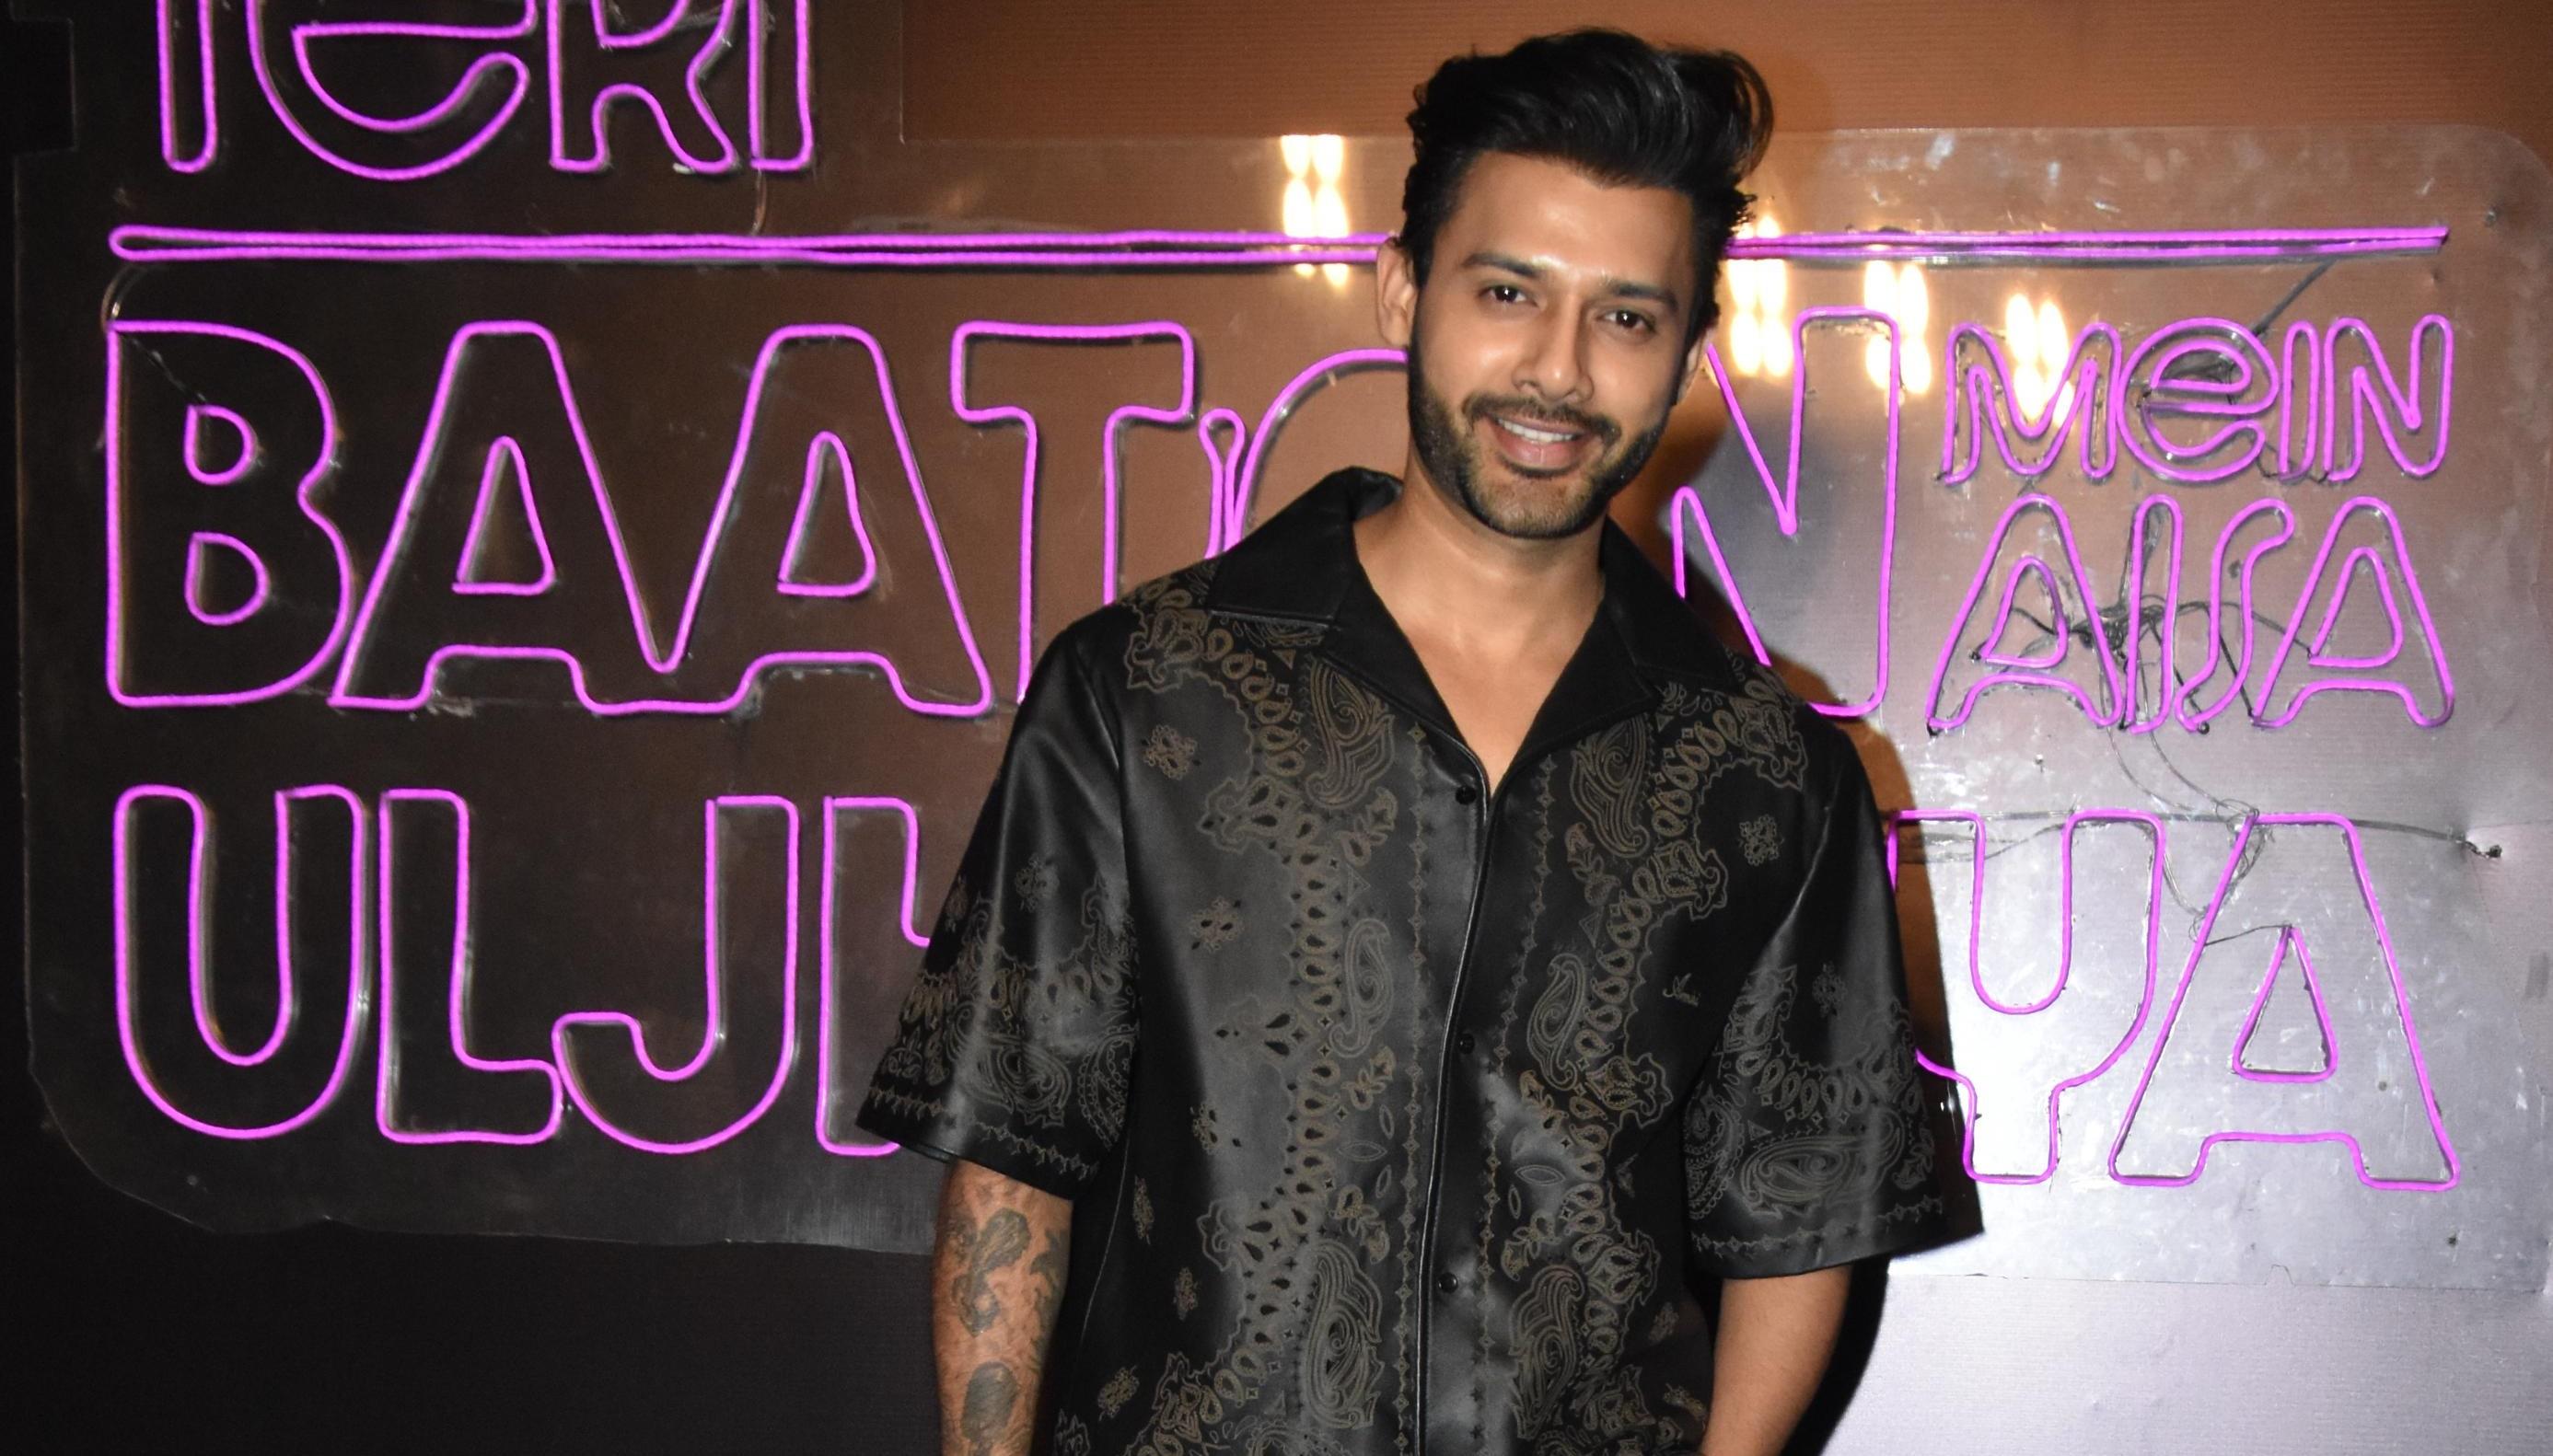 Singer Stebin Ben who has been rumoured to be dating Kriti's sister Nupur Sanon was also in attendance. 